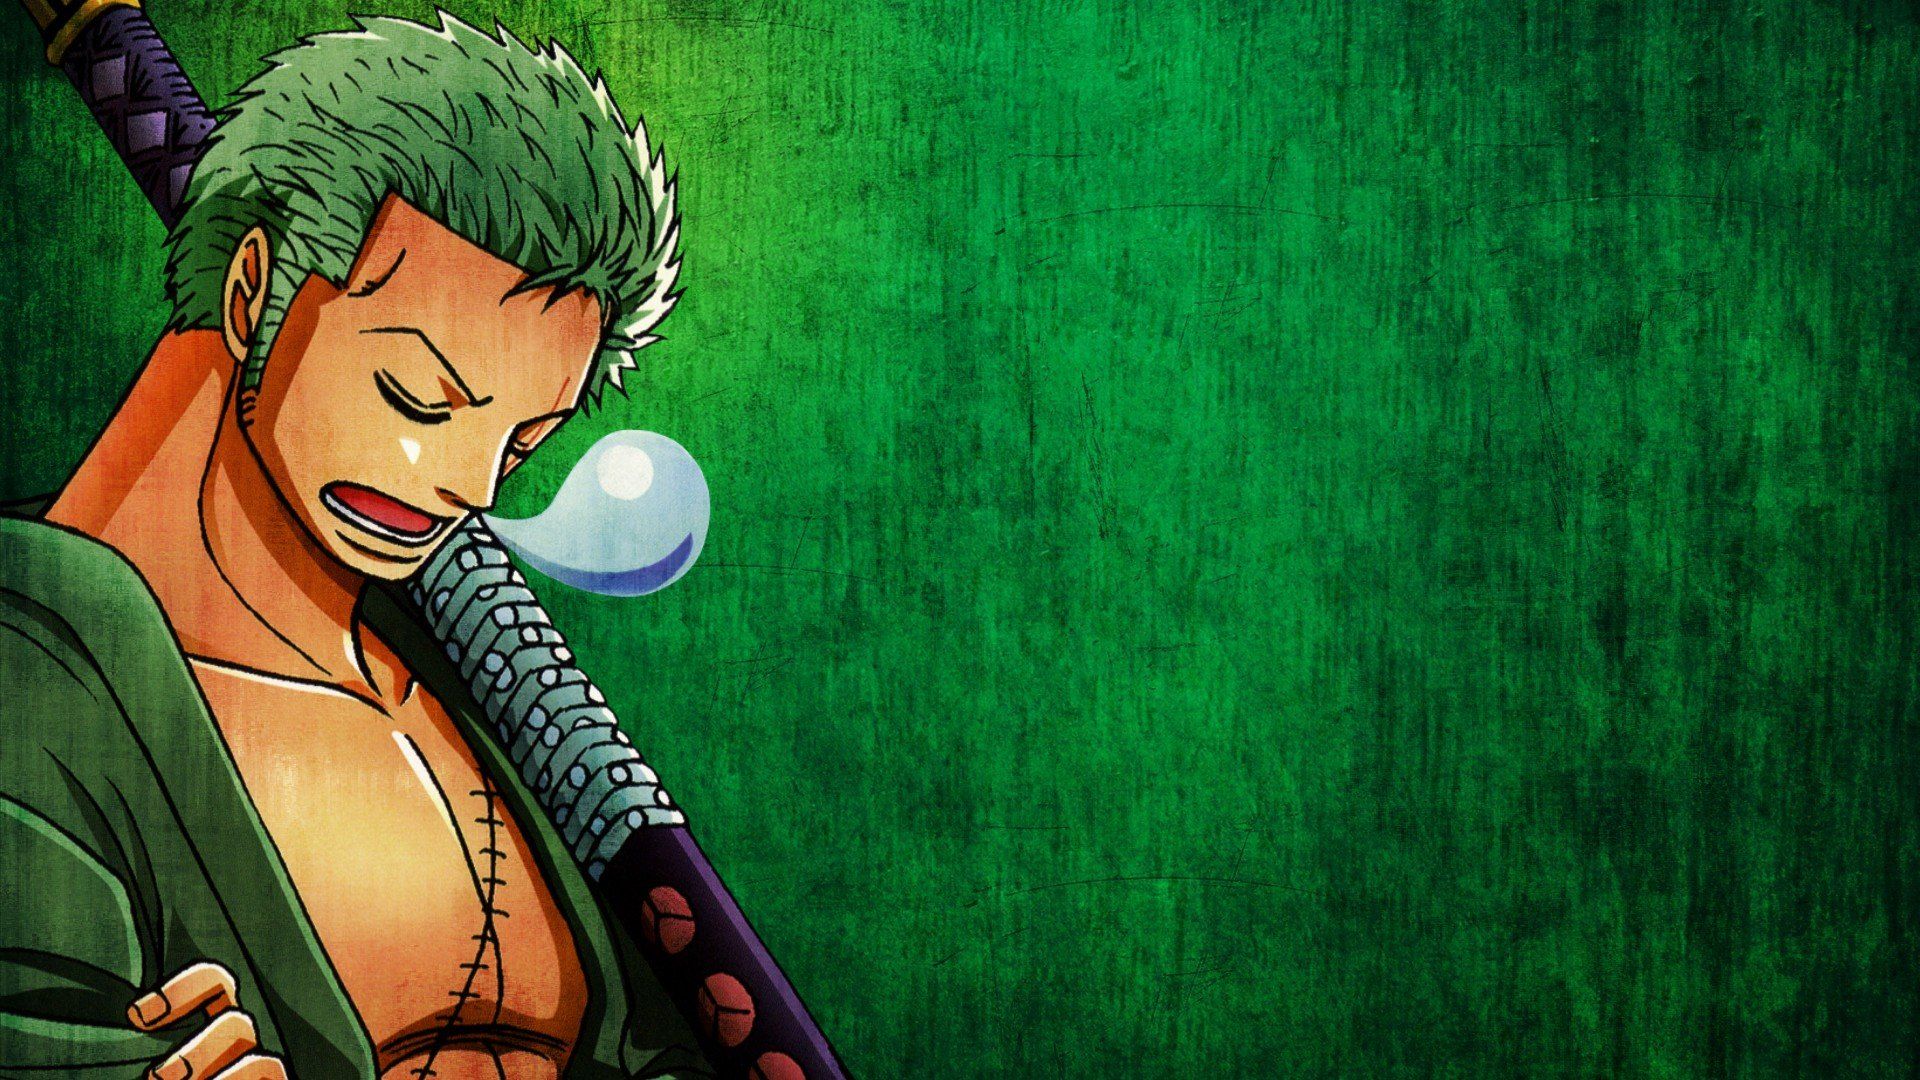 One Piece New World Zoro Wallpapers HD 10541 - HD Wallpapers Site